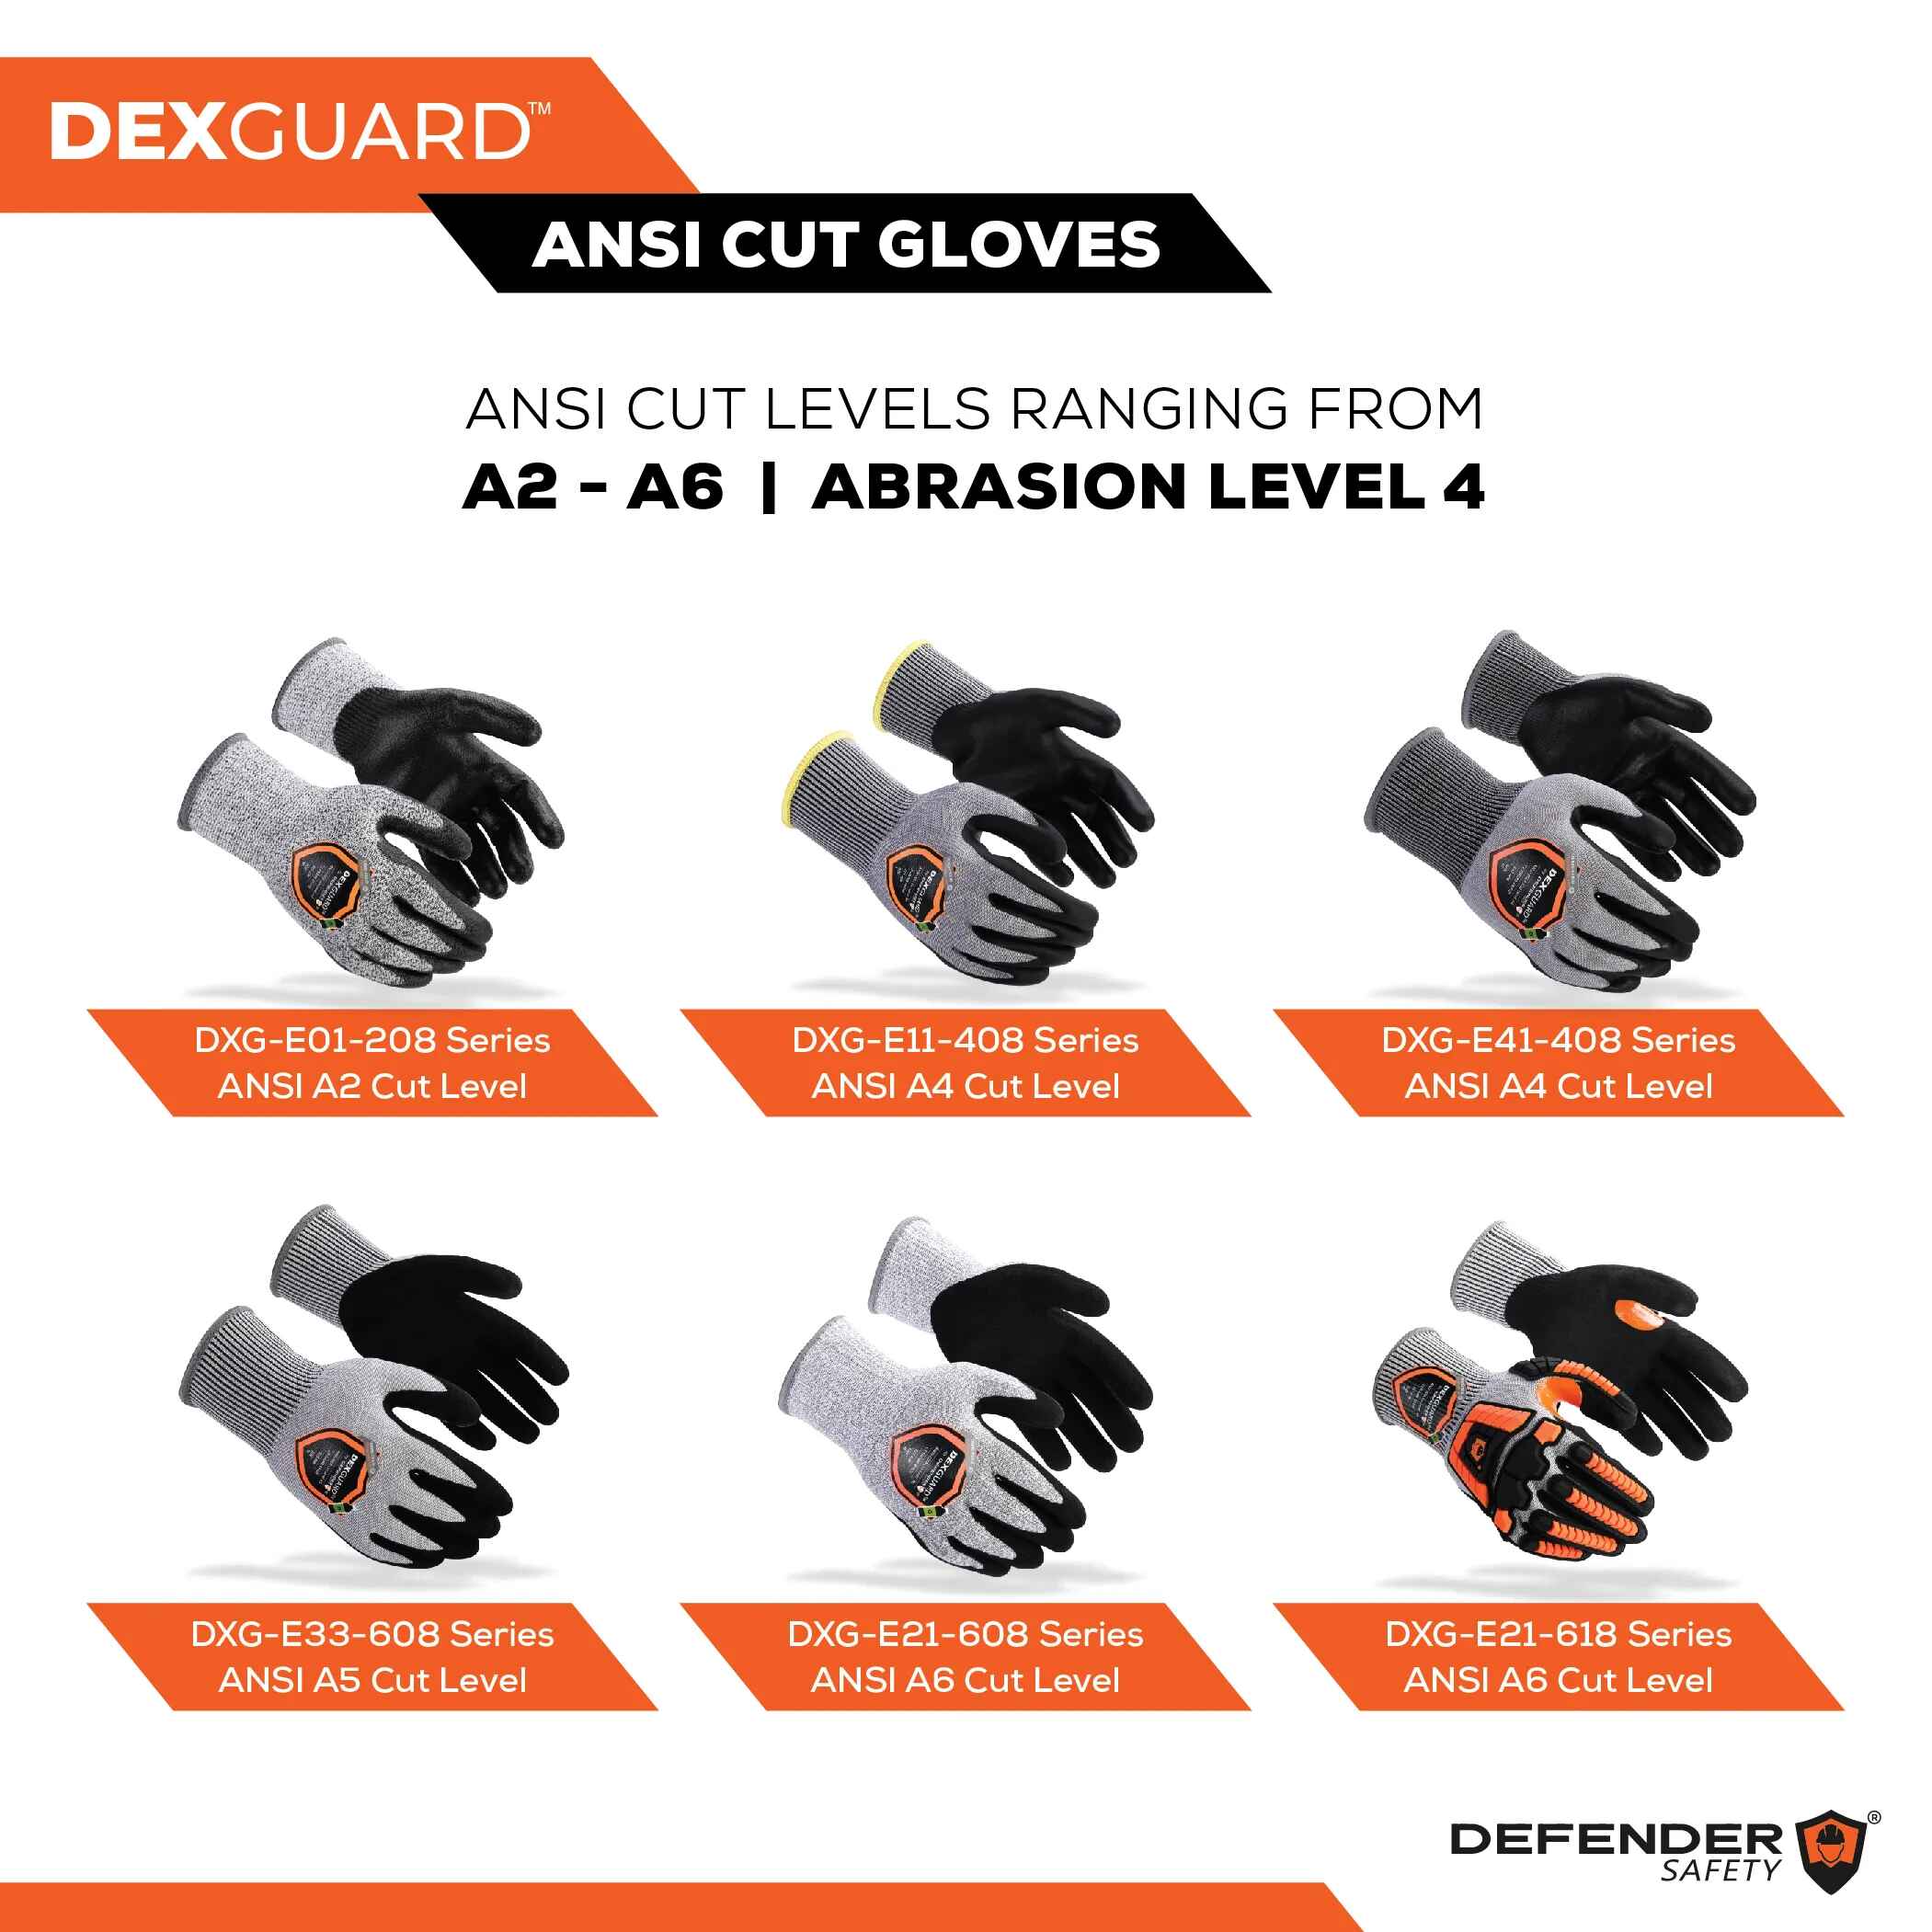 https://defendersafety.com/cdn/shop/products/dexguard-a6-cut-gloves-level-4-abrasion-resistant-textured-nitrile-coating-touch-screen-compatible-931603.jpg?v=1690825177&width=2101